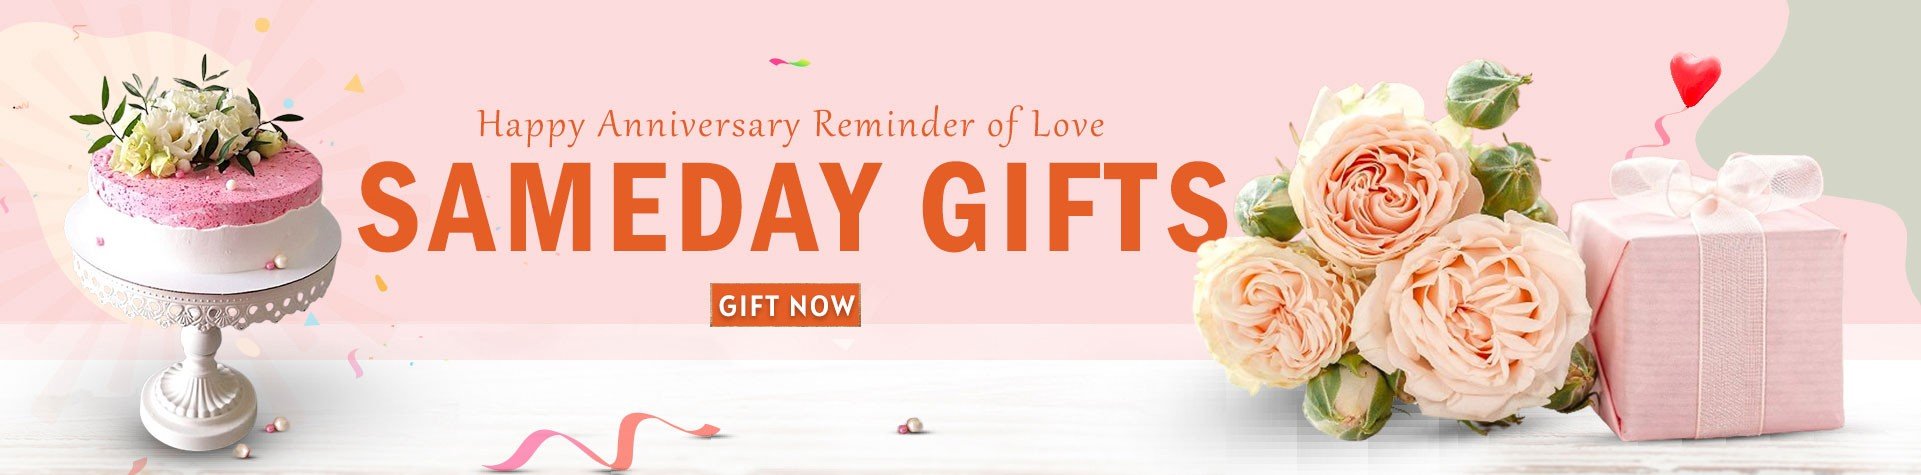 Anniversary Gifts Same Day Delivery